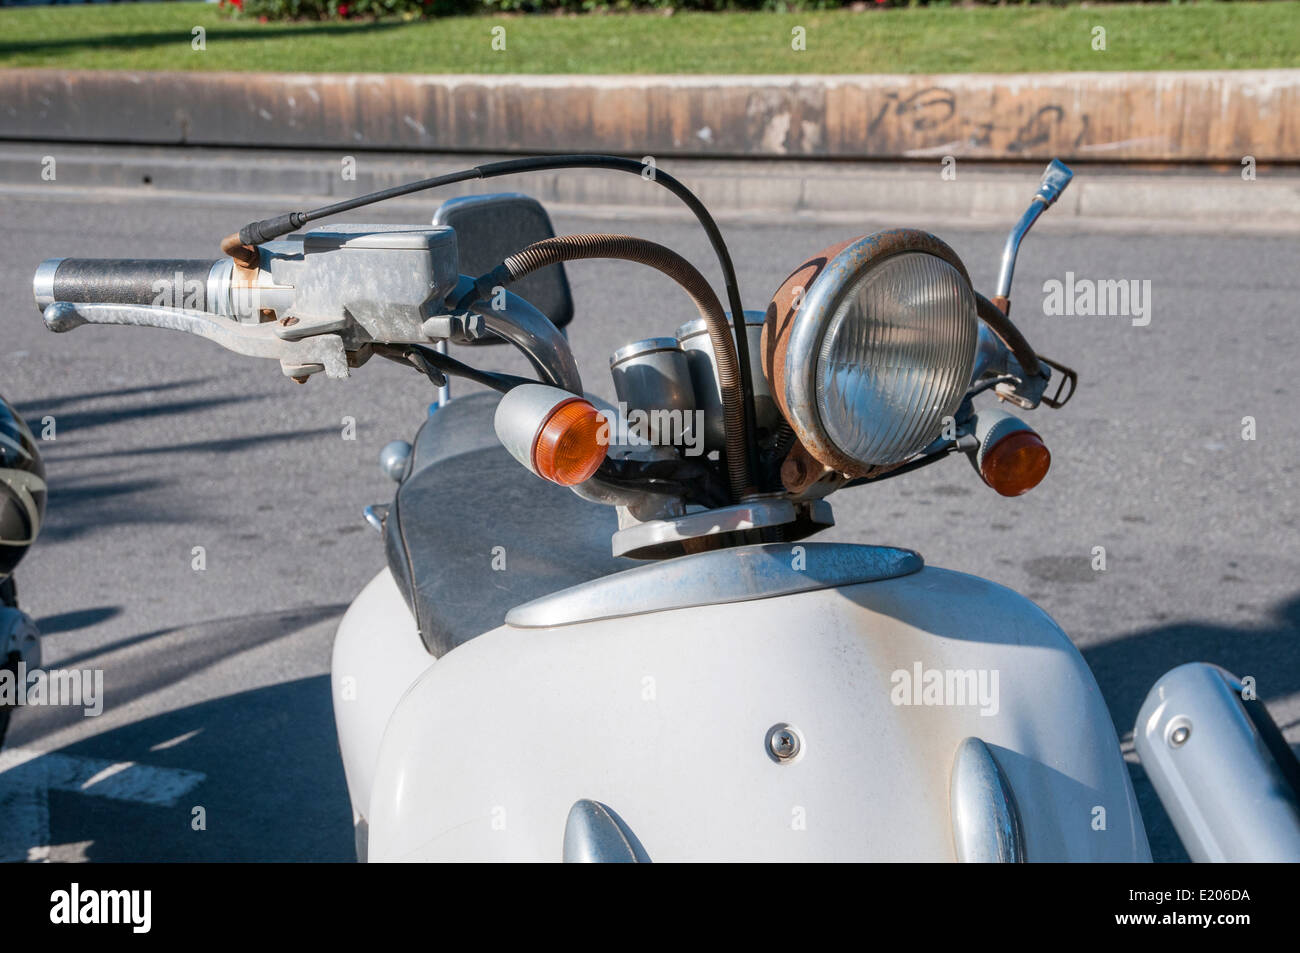 antique motorcycle parked in the parking Stock Photo